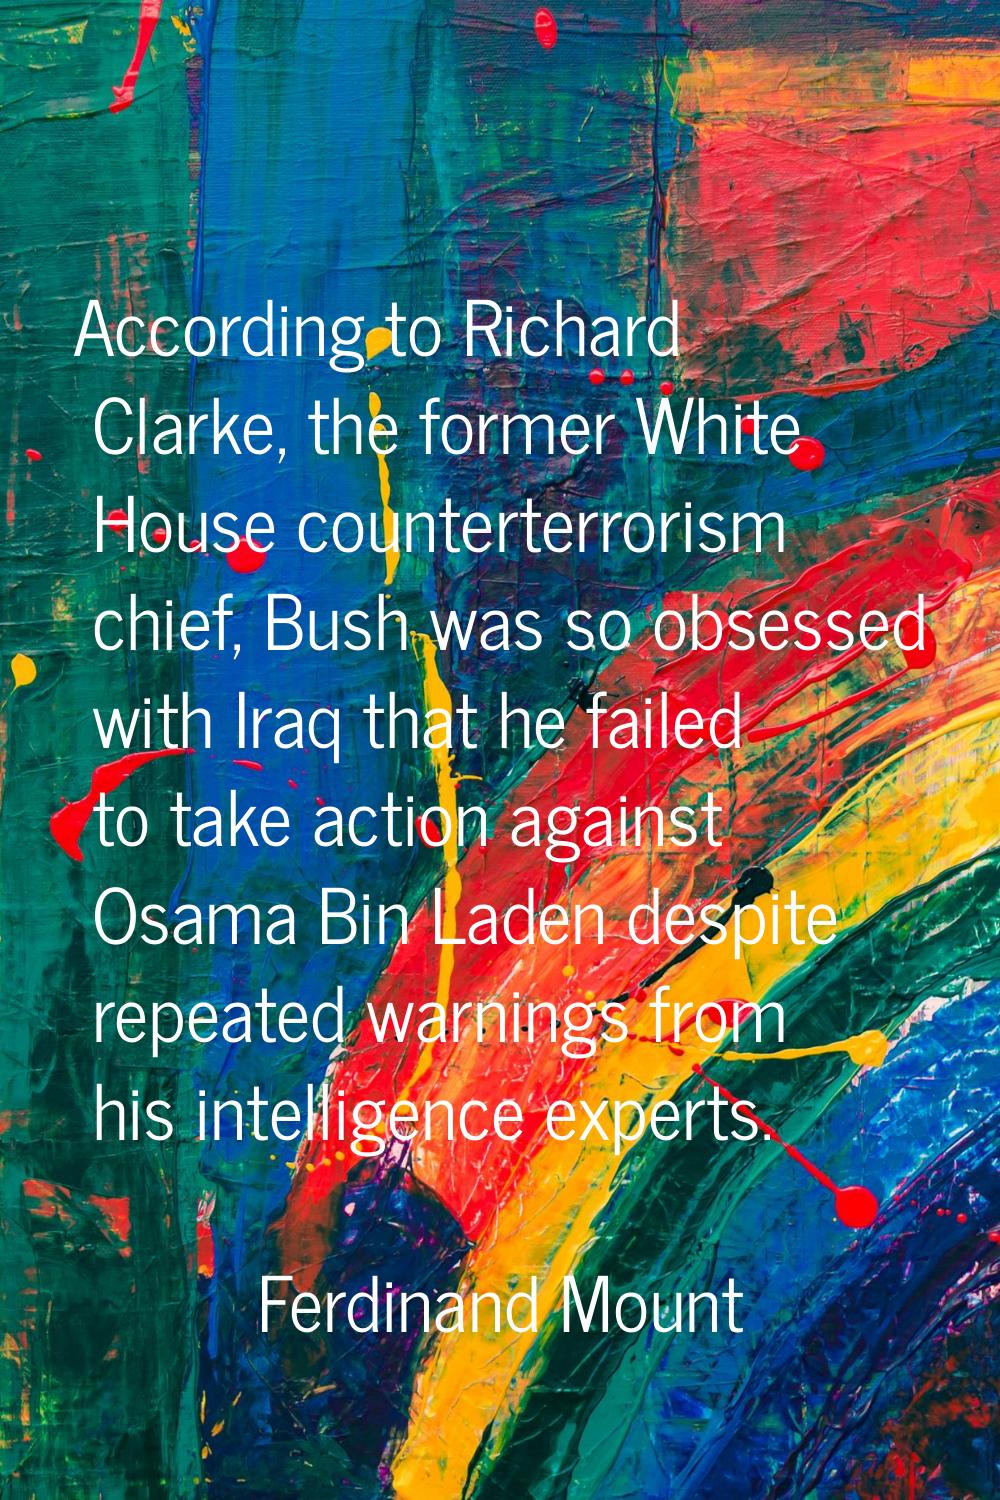 According to Richard Clarke, the former White House counterterrorism chief, Bush was so obsessed wi